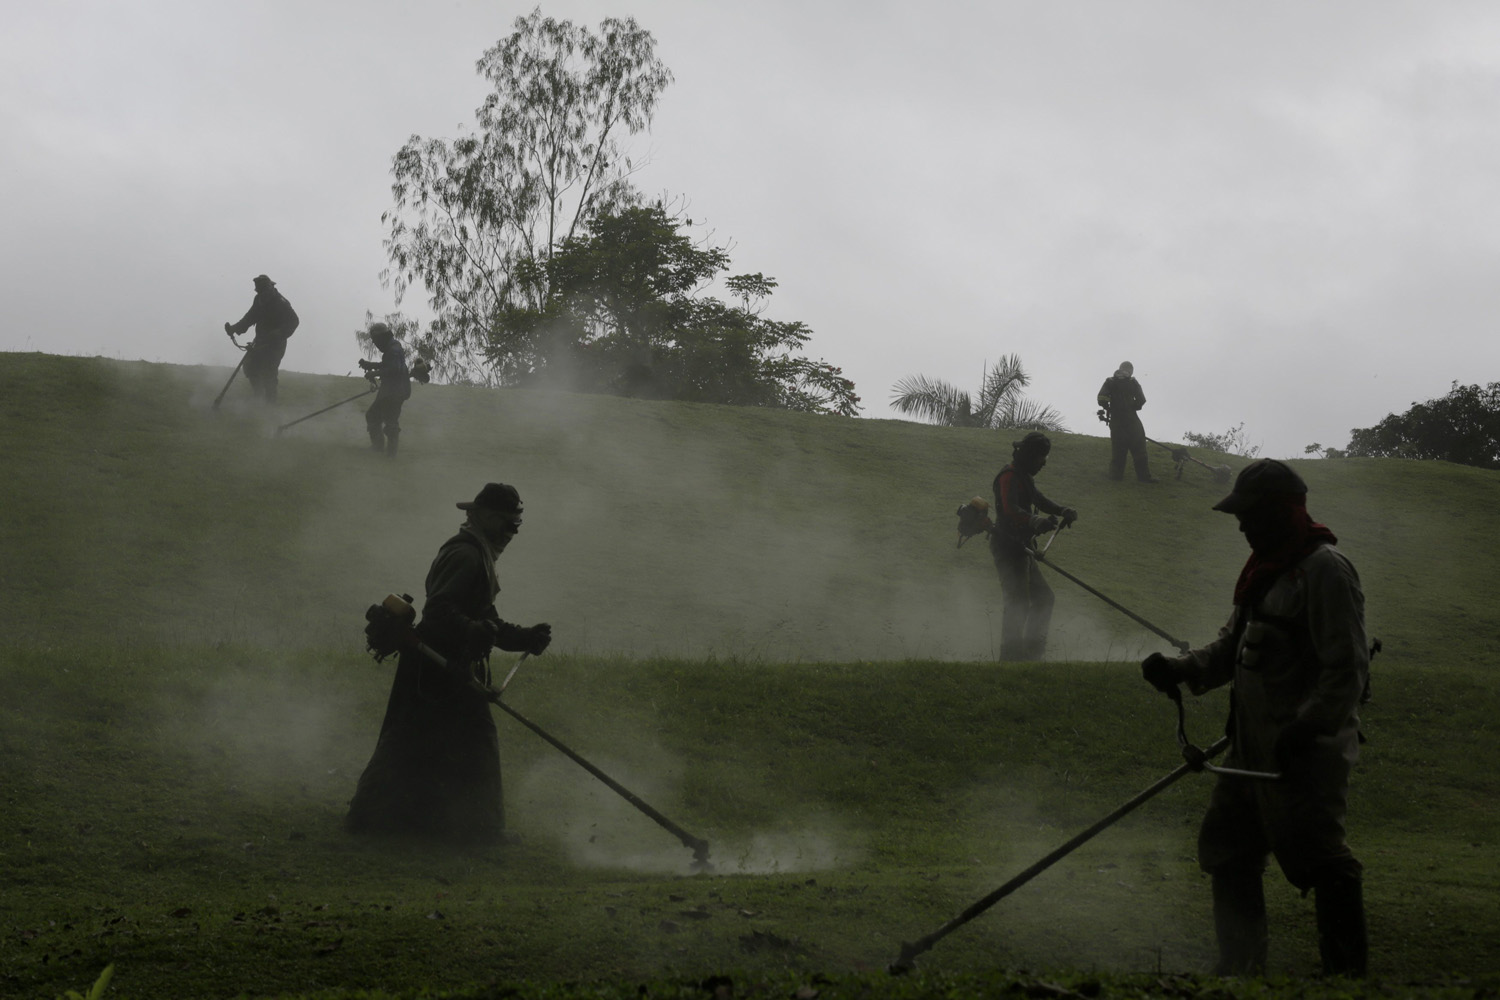 Laborers cut grass in the City of Knowledge in Panama City